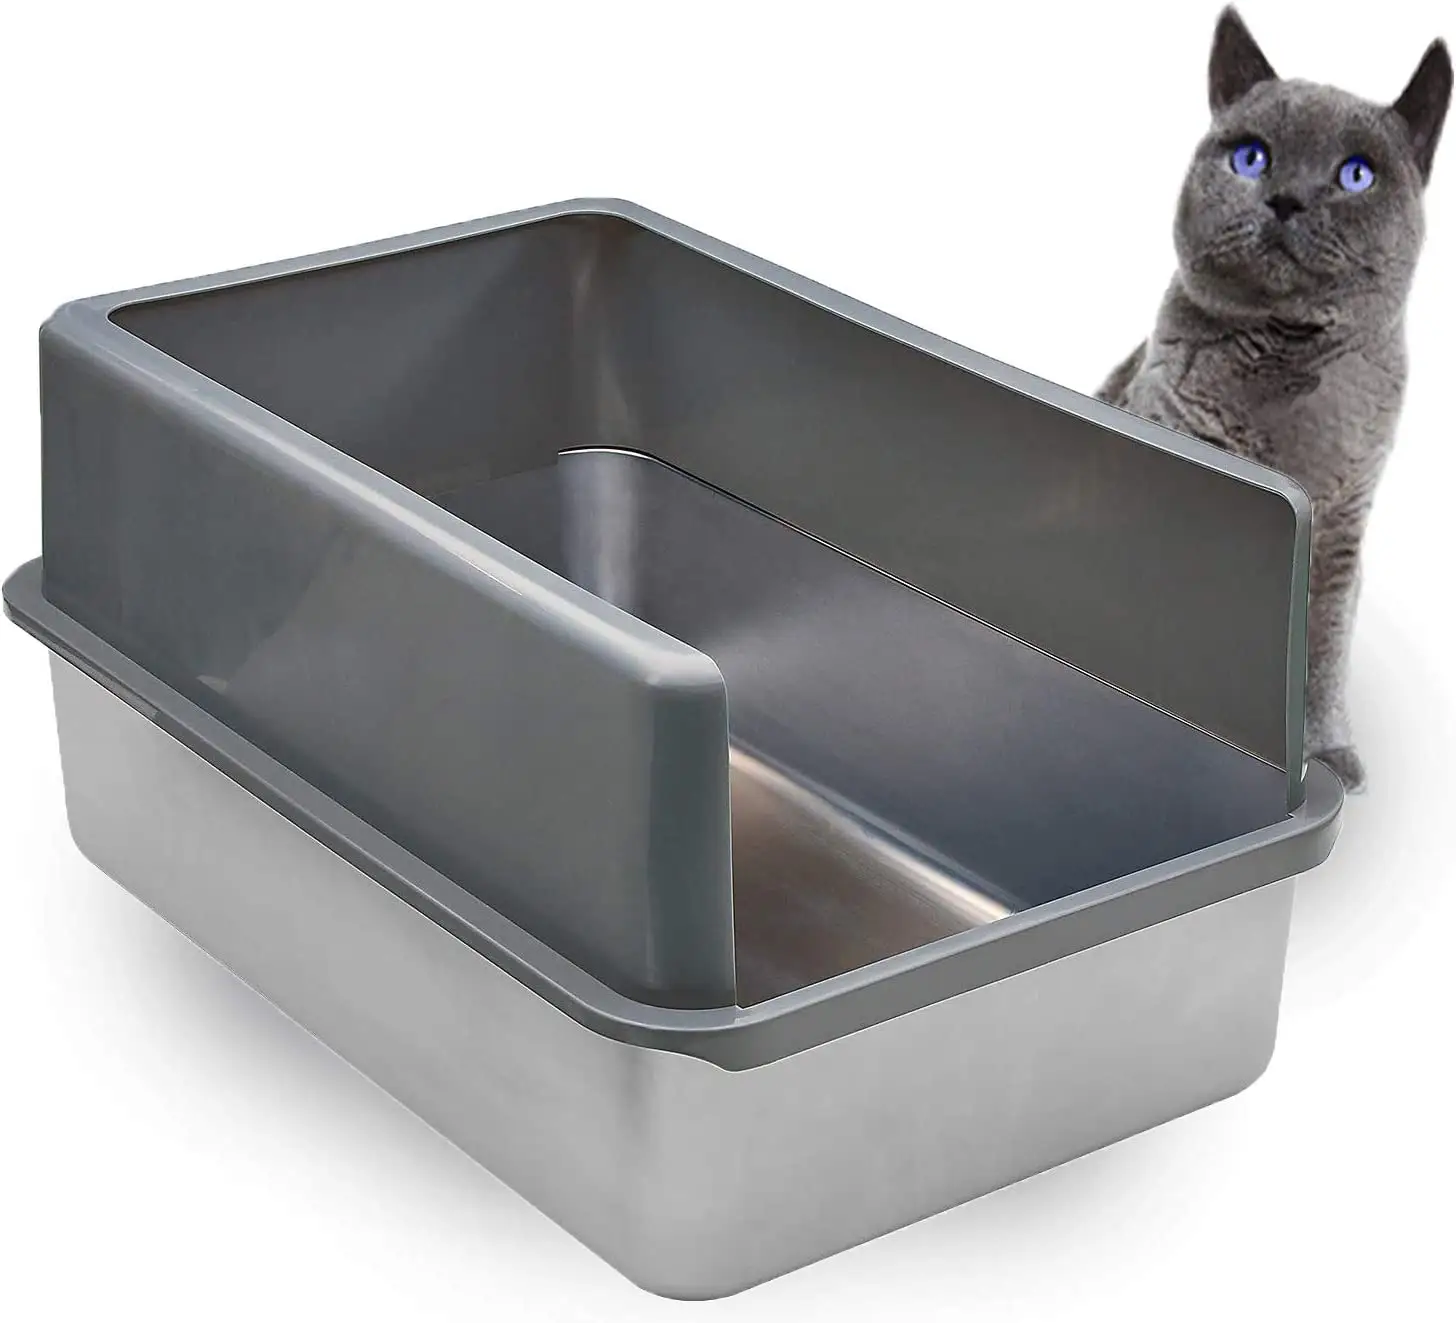 Stainless Steel Cat XL Litter Box - Never Absorbs Odor, Stains, or Rusts - No Residue Build Up - Easy Cleaning Litterbox Design